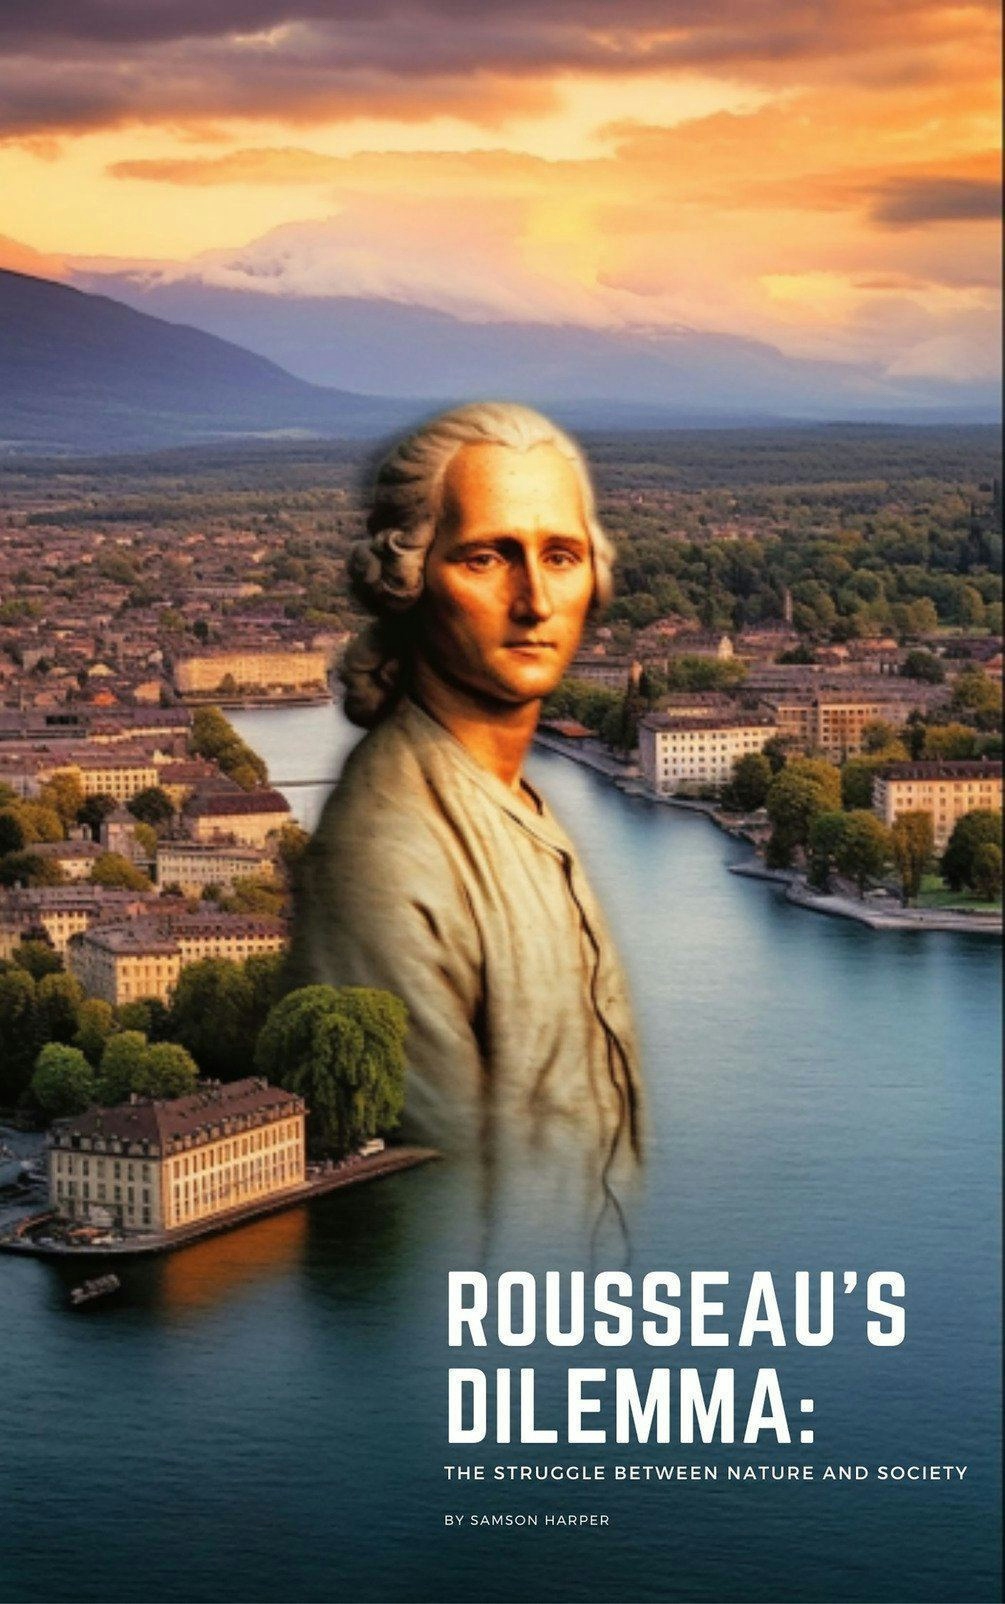 Rousseau's Dilemma: The Struggle Between Nature and Society